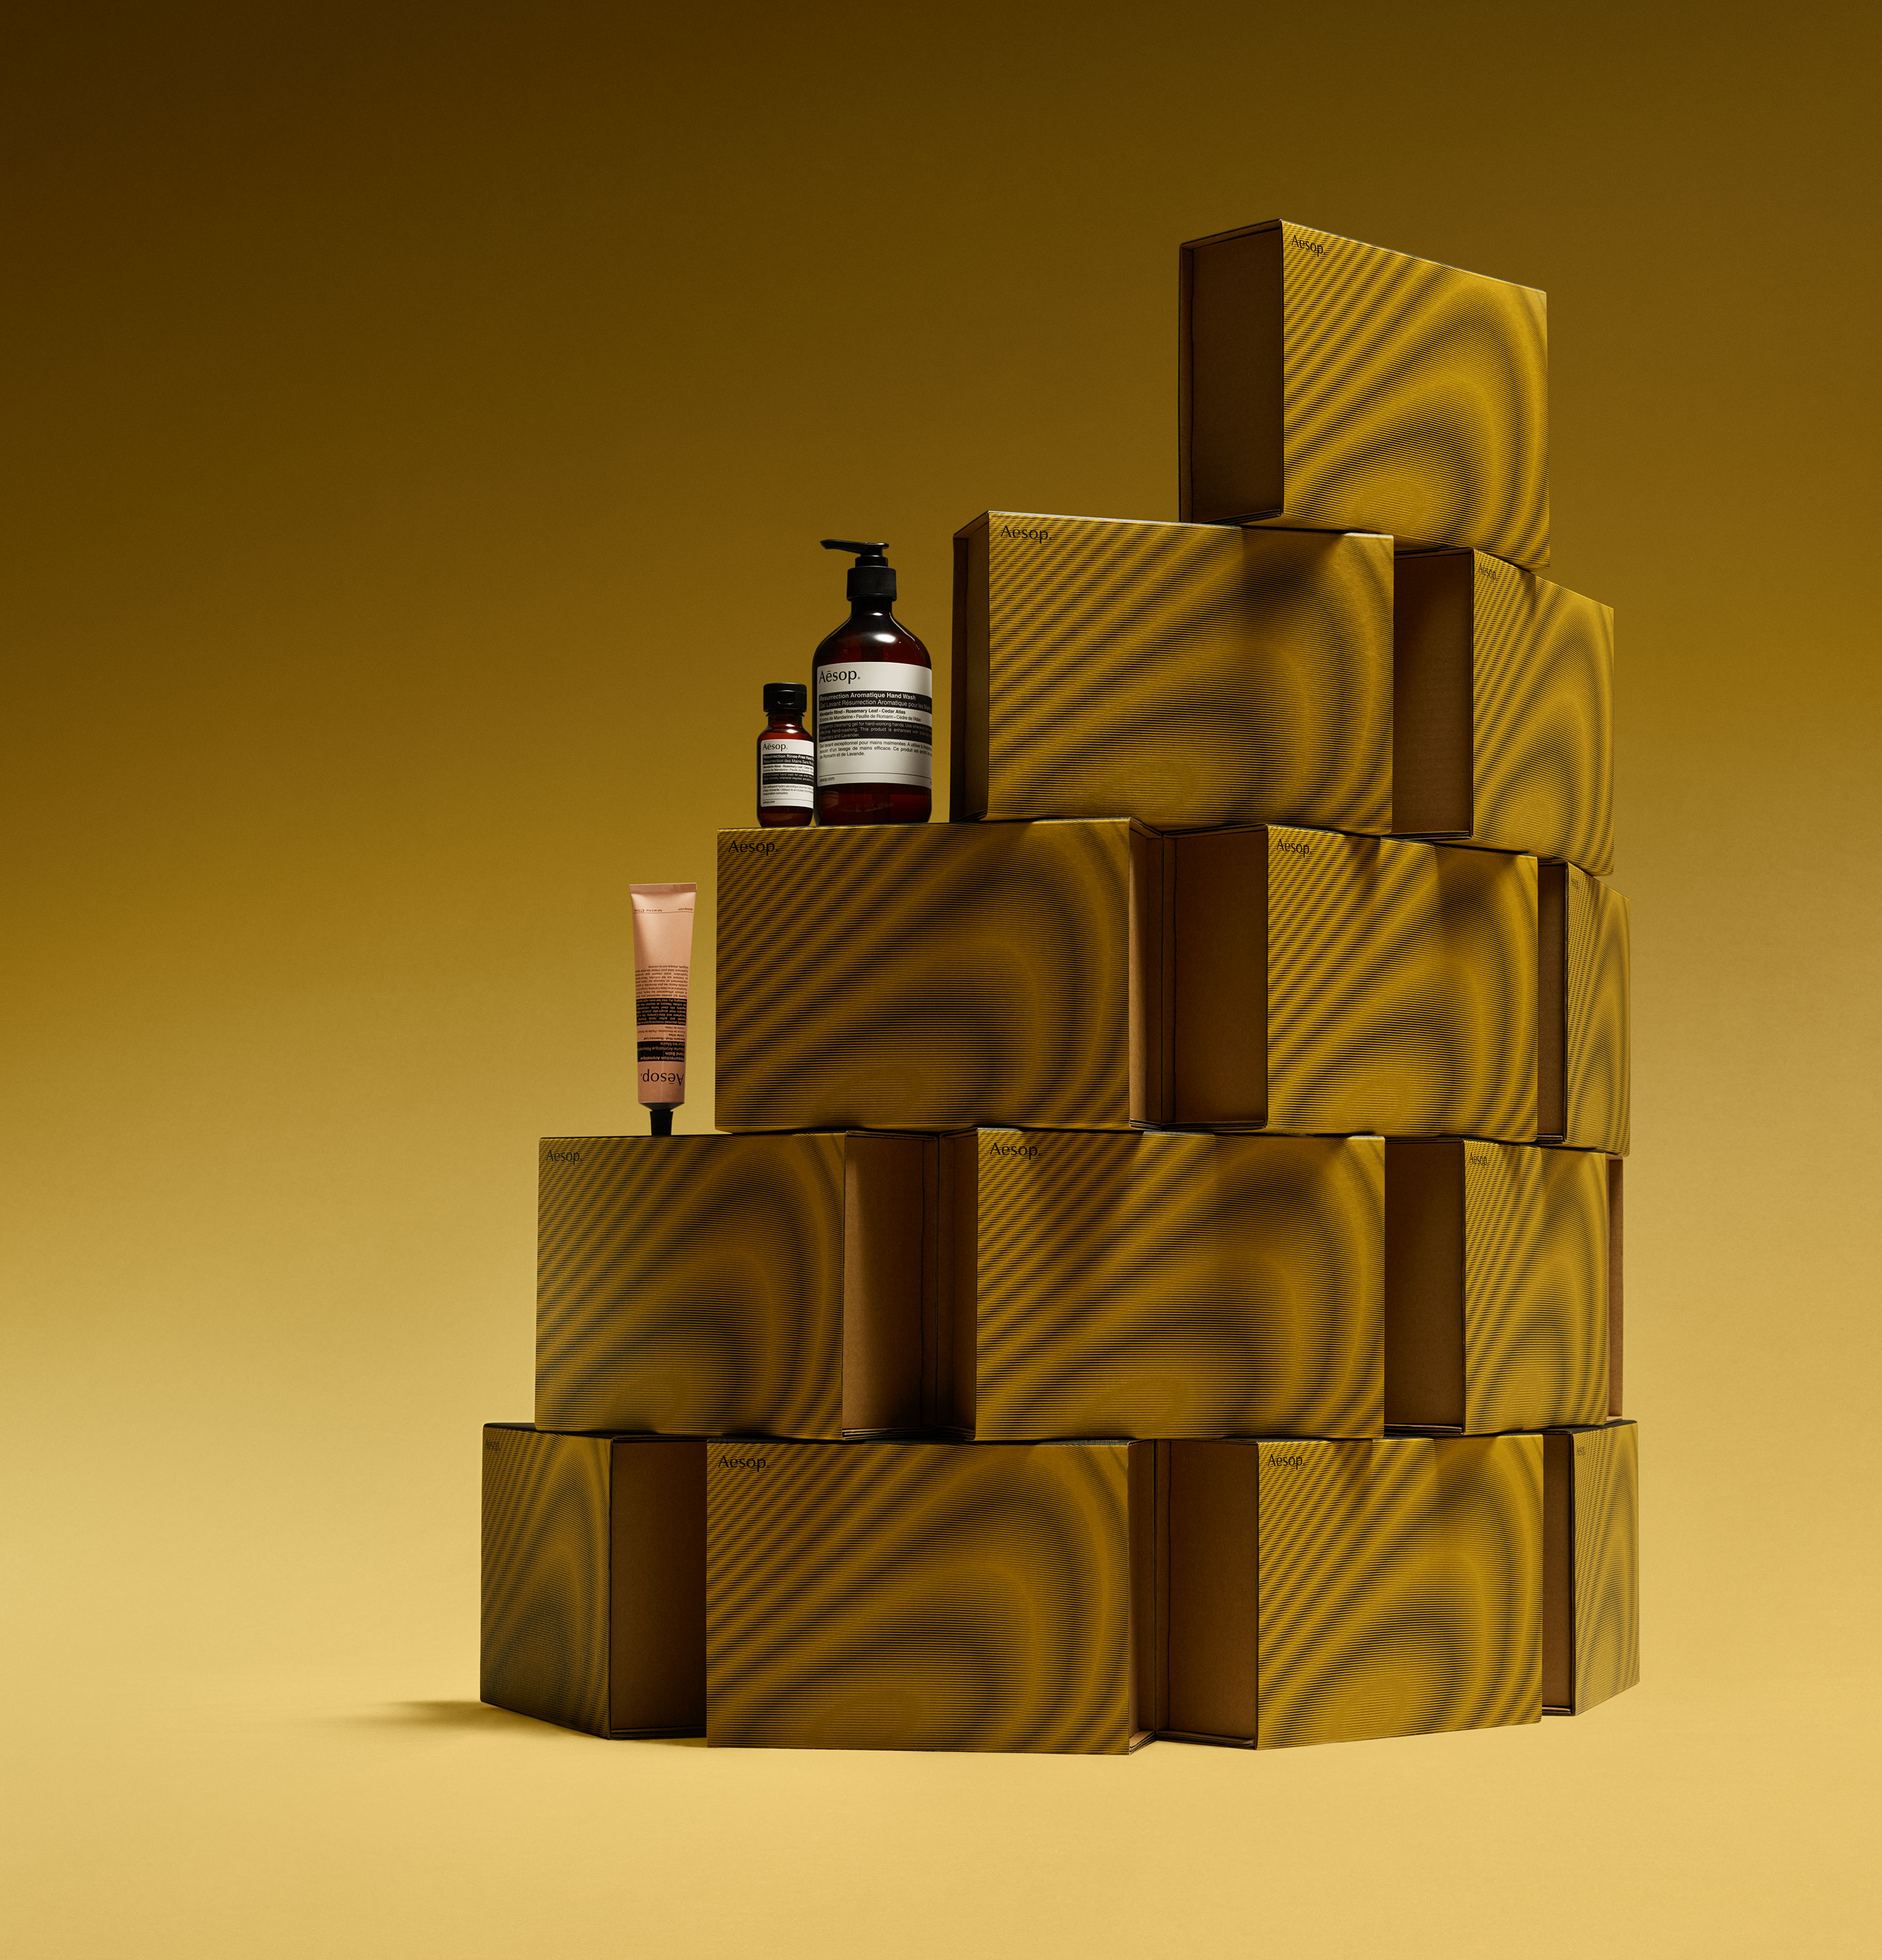 Aesop products placed on stacked mustard yellow cardboard boxes